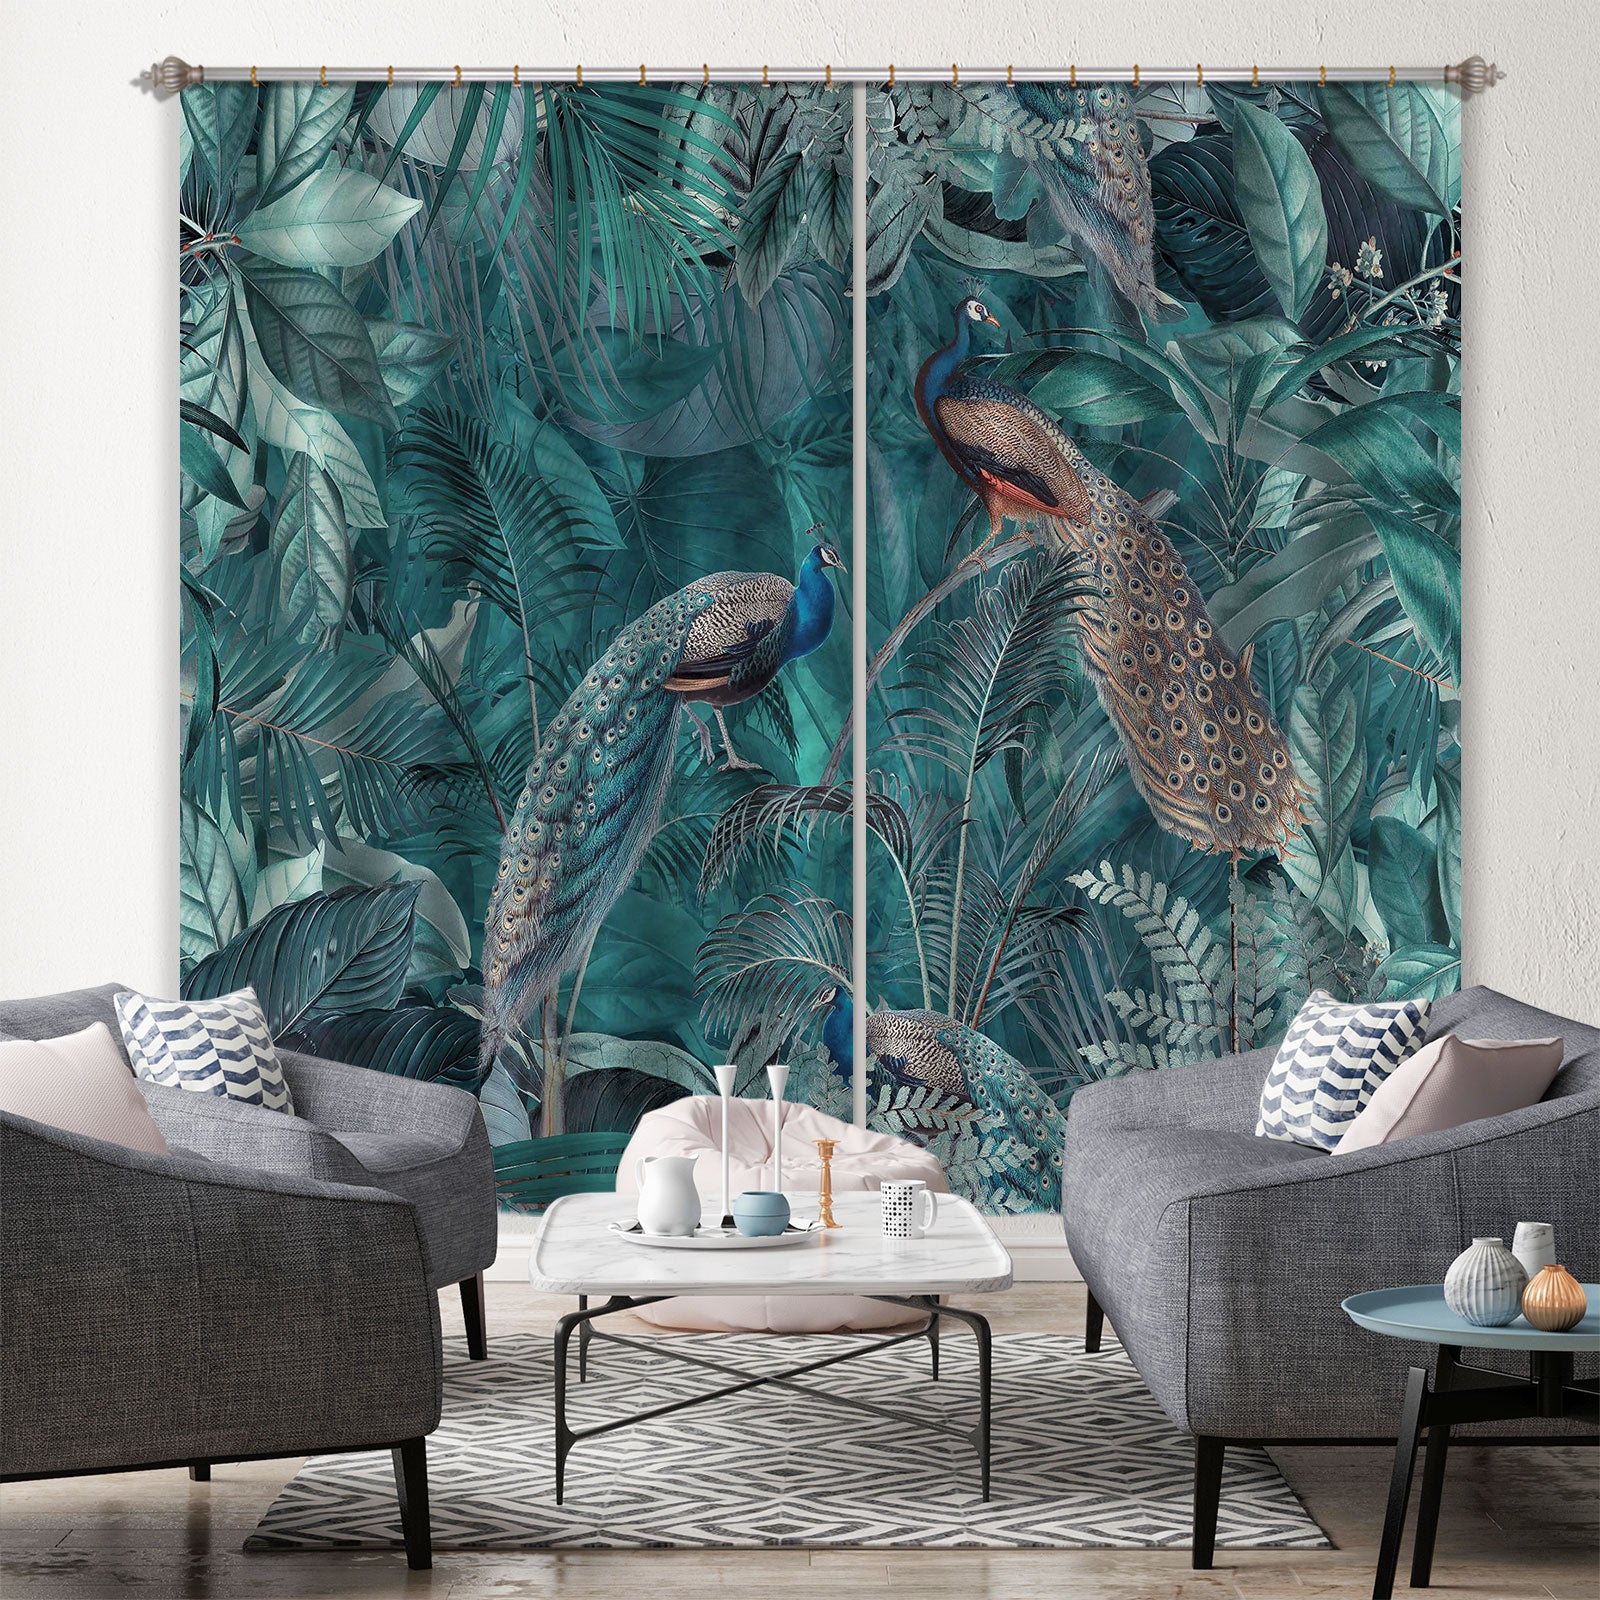 3D Peacock Leaves 012 Andrea haase Curtain Curtains Drapes